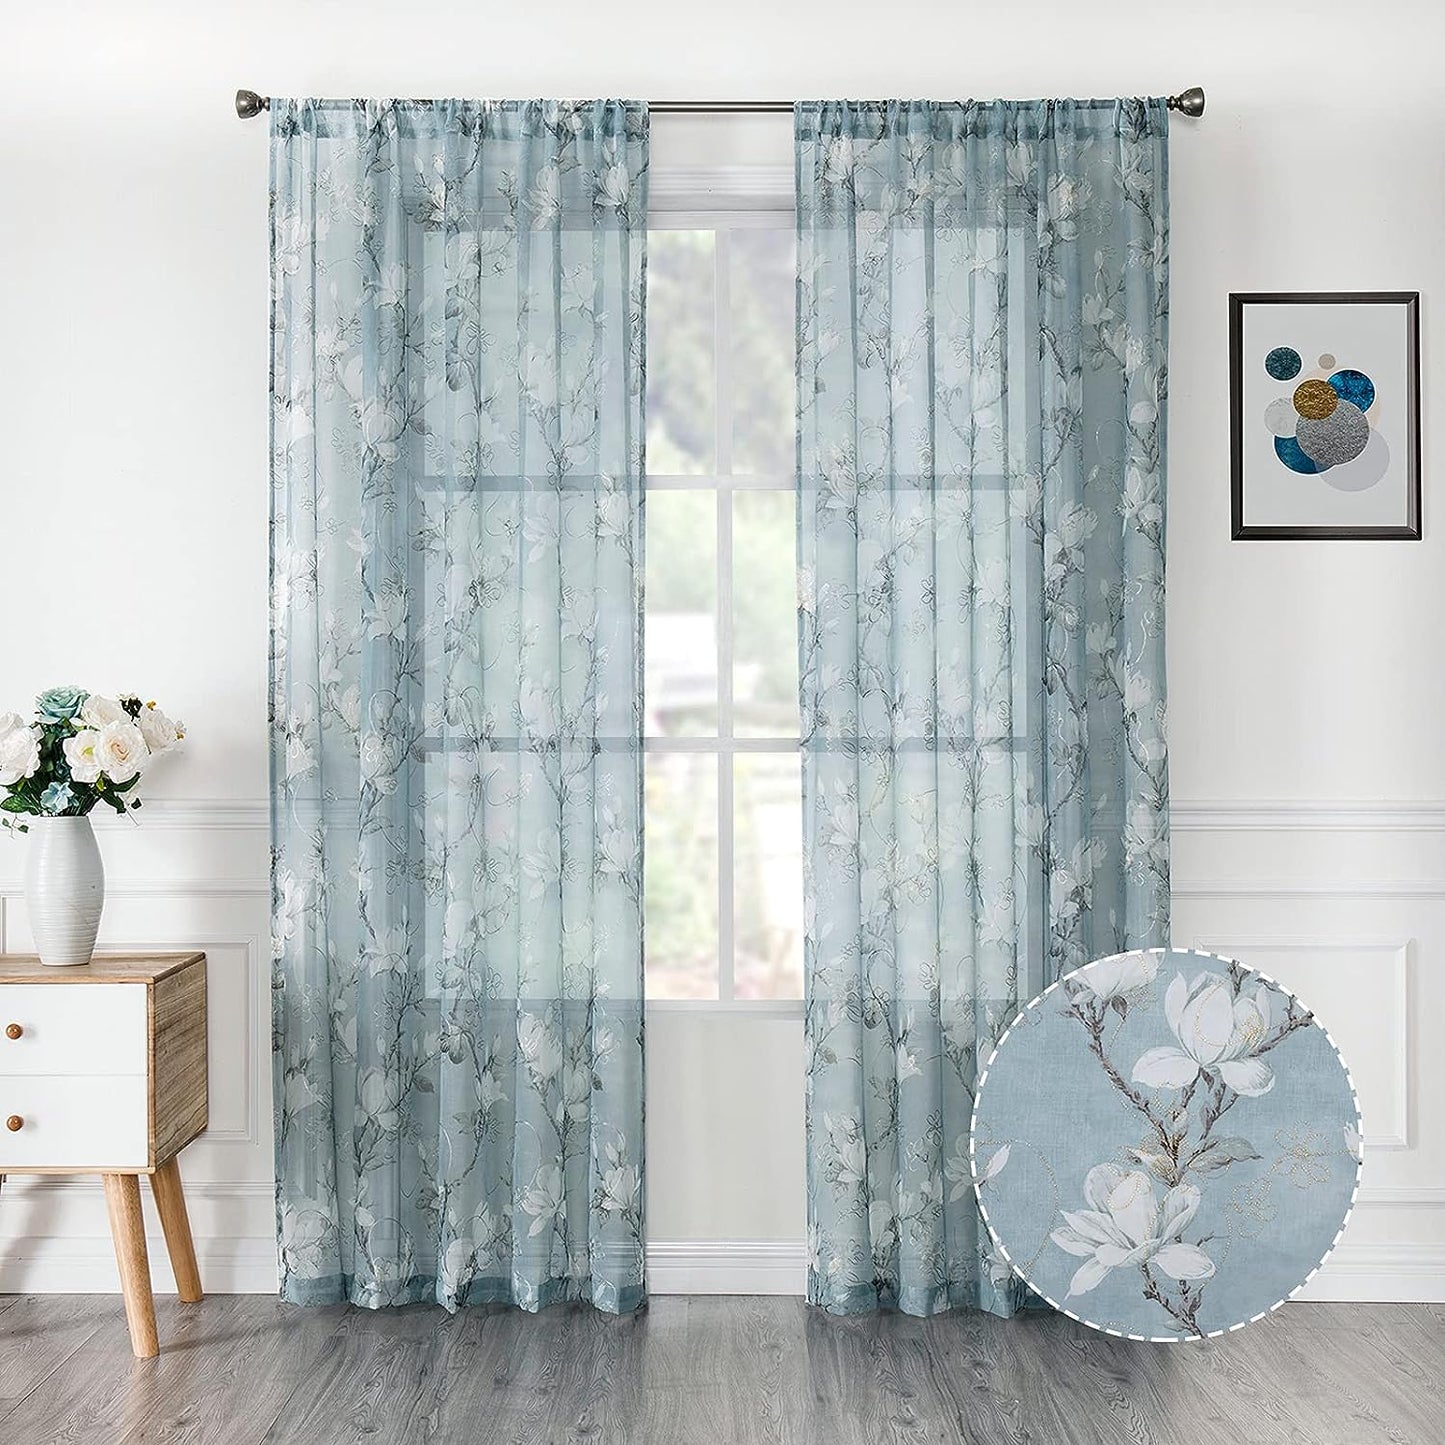 Tollpiz Floral White Sheer Curtain Flower Print Vine Embroidery Bedroom Curtains Rod Pocket Voile Window Curtain for Living Room, 54 X 84 Inches Long, Set of 2 Panels  Tollpiz Tex Blue 54"W X 84"L 